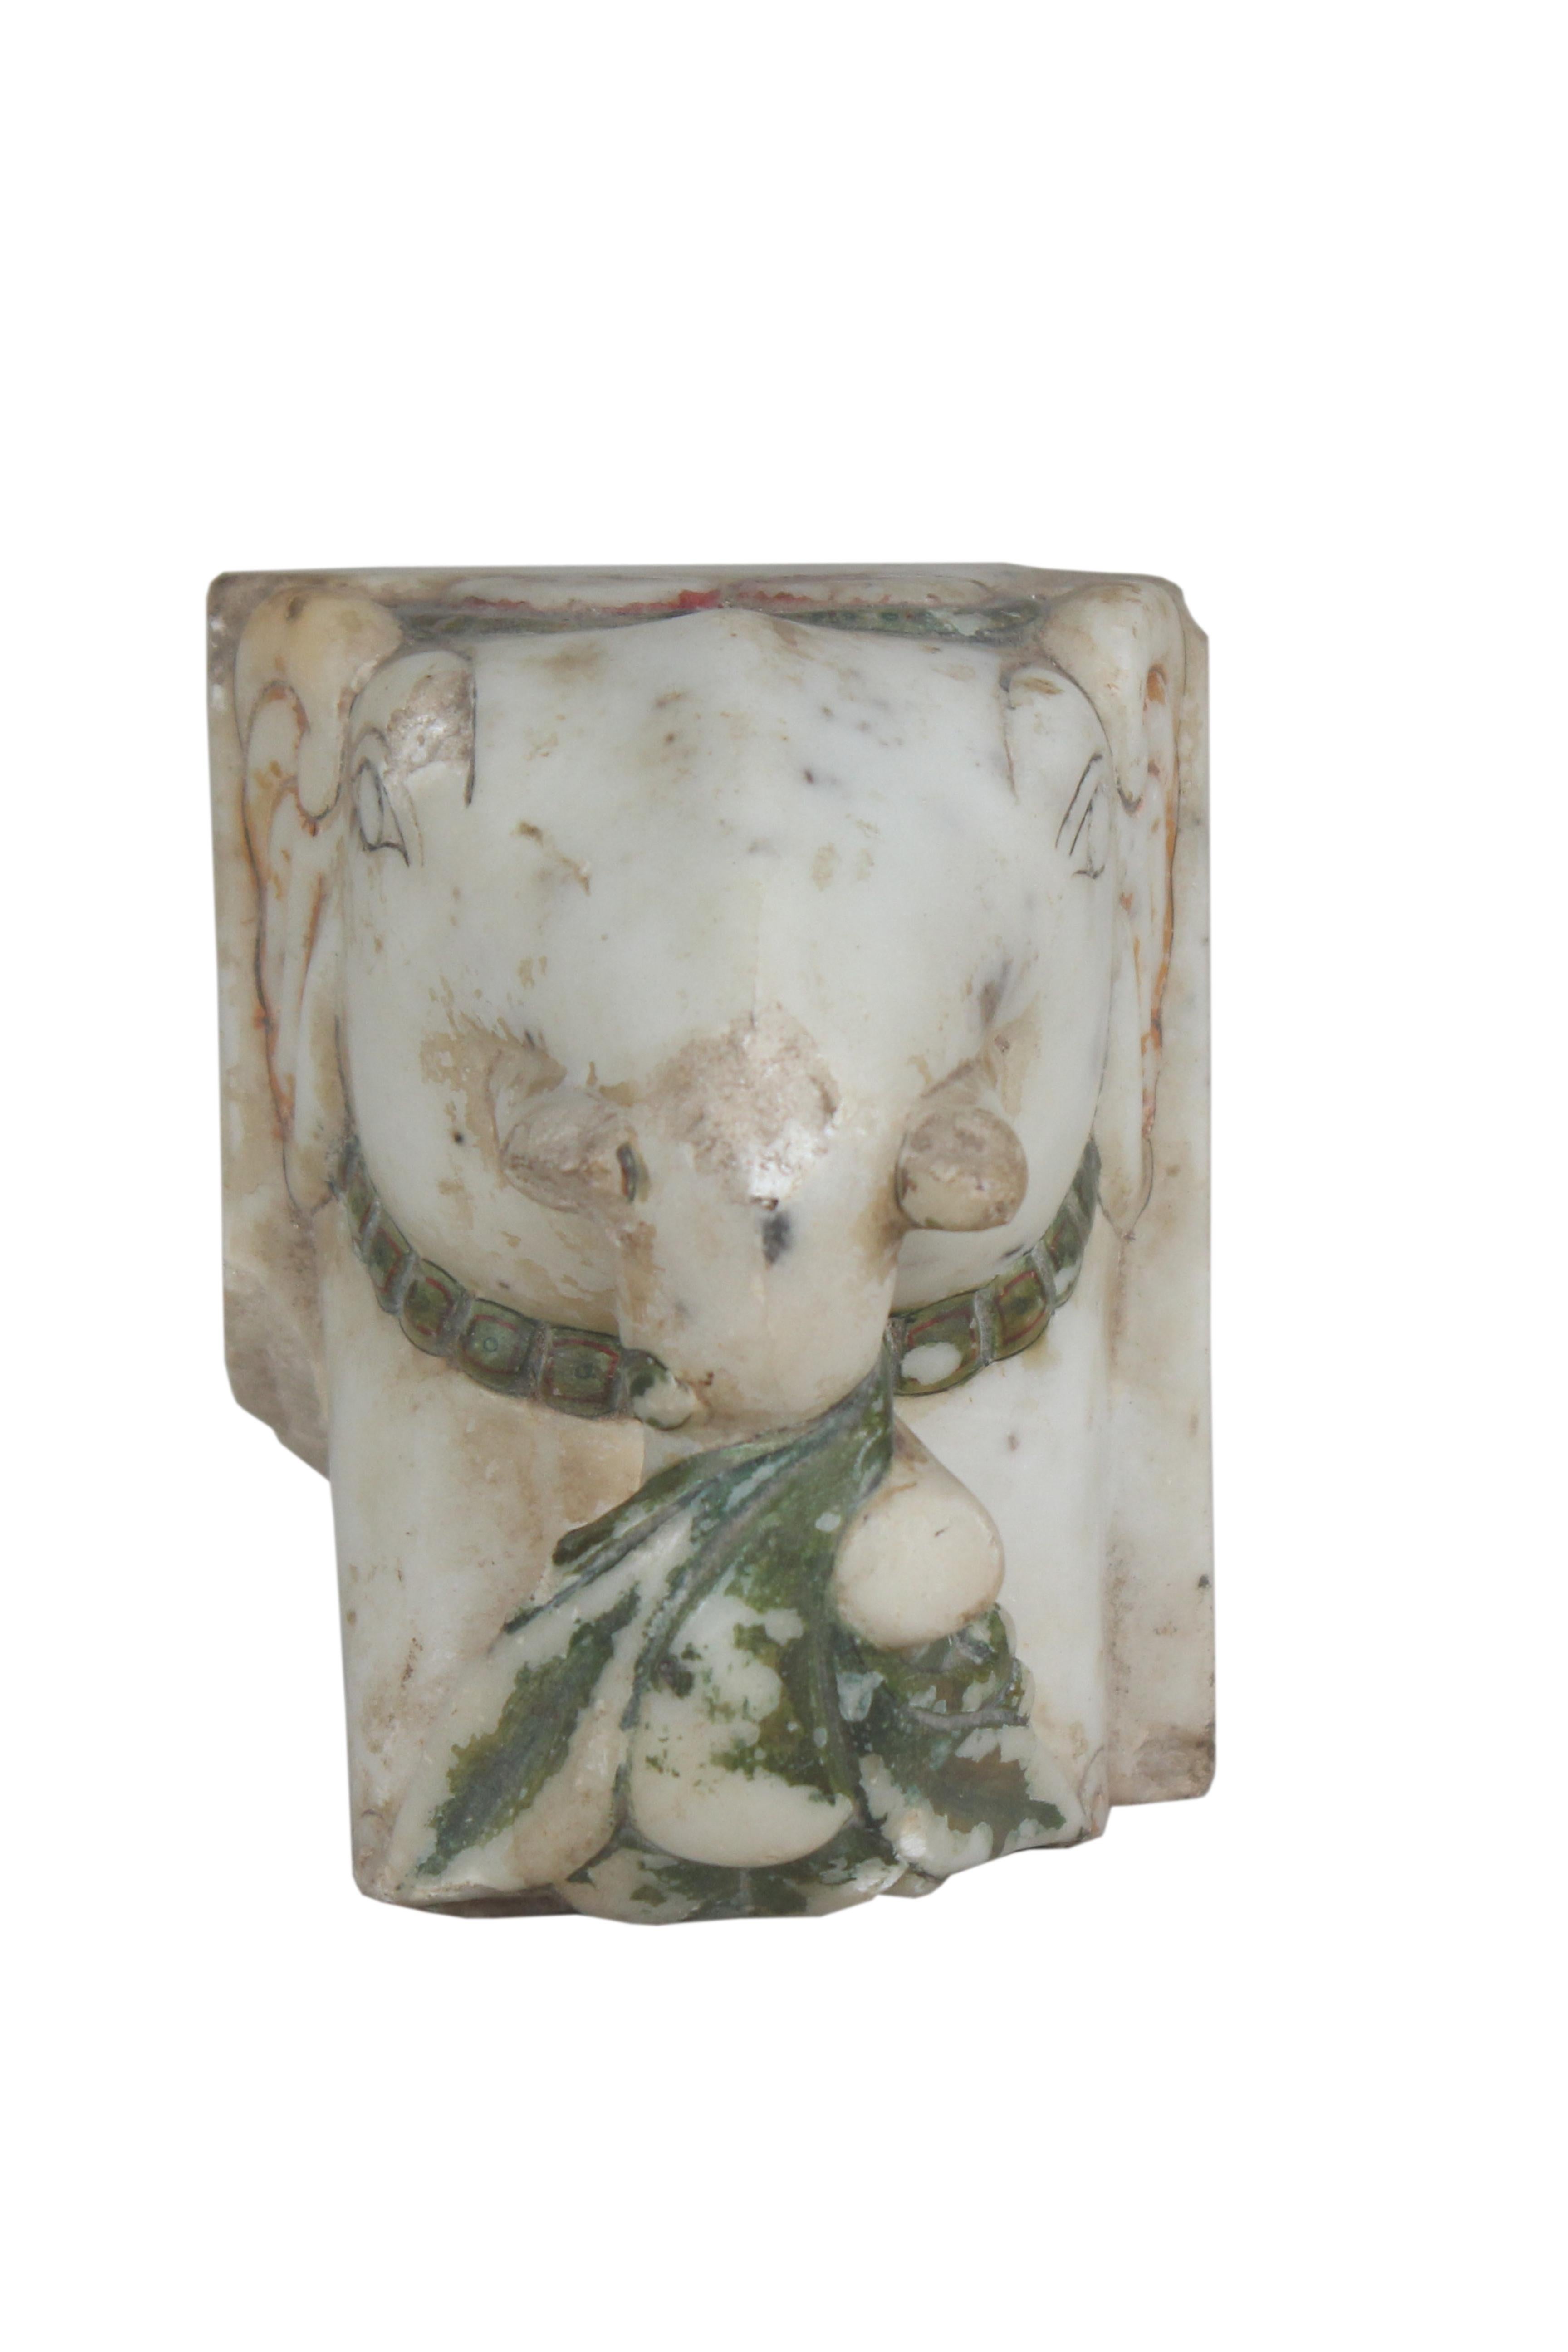 A lovely, old white marble Ganesh head with traces of the original paint. It is a fragment of larger piece with great patina, India, early 20th century. Everyone loves Ganesh--the remover of obstacles. Put him near your doorway.